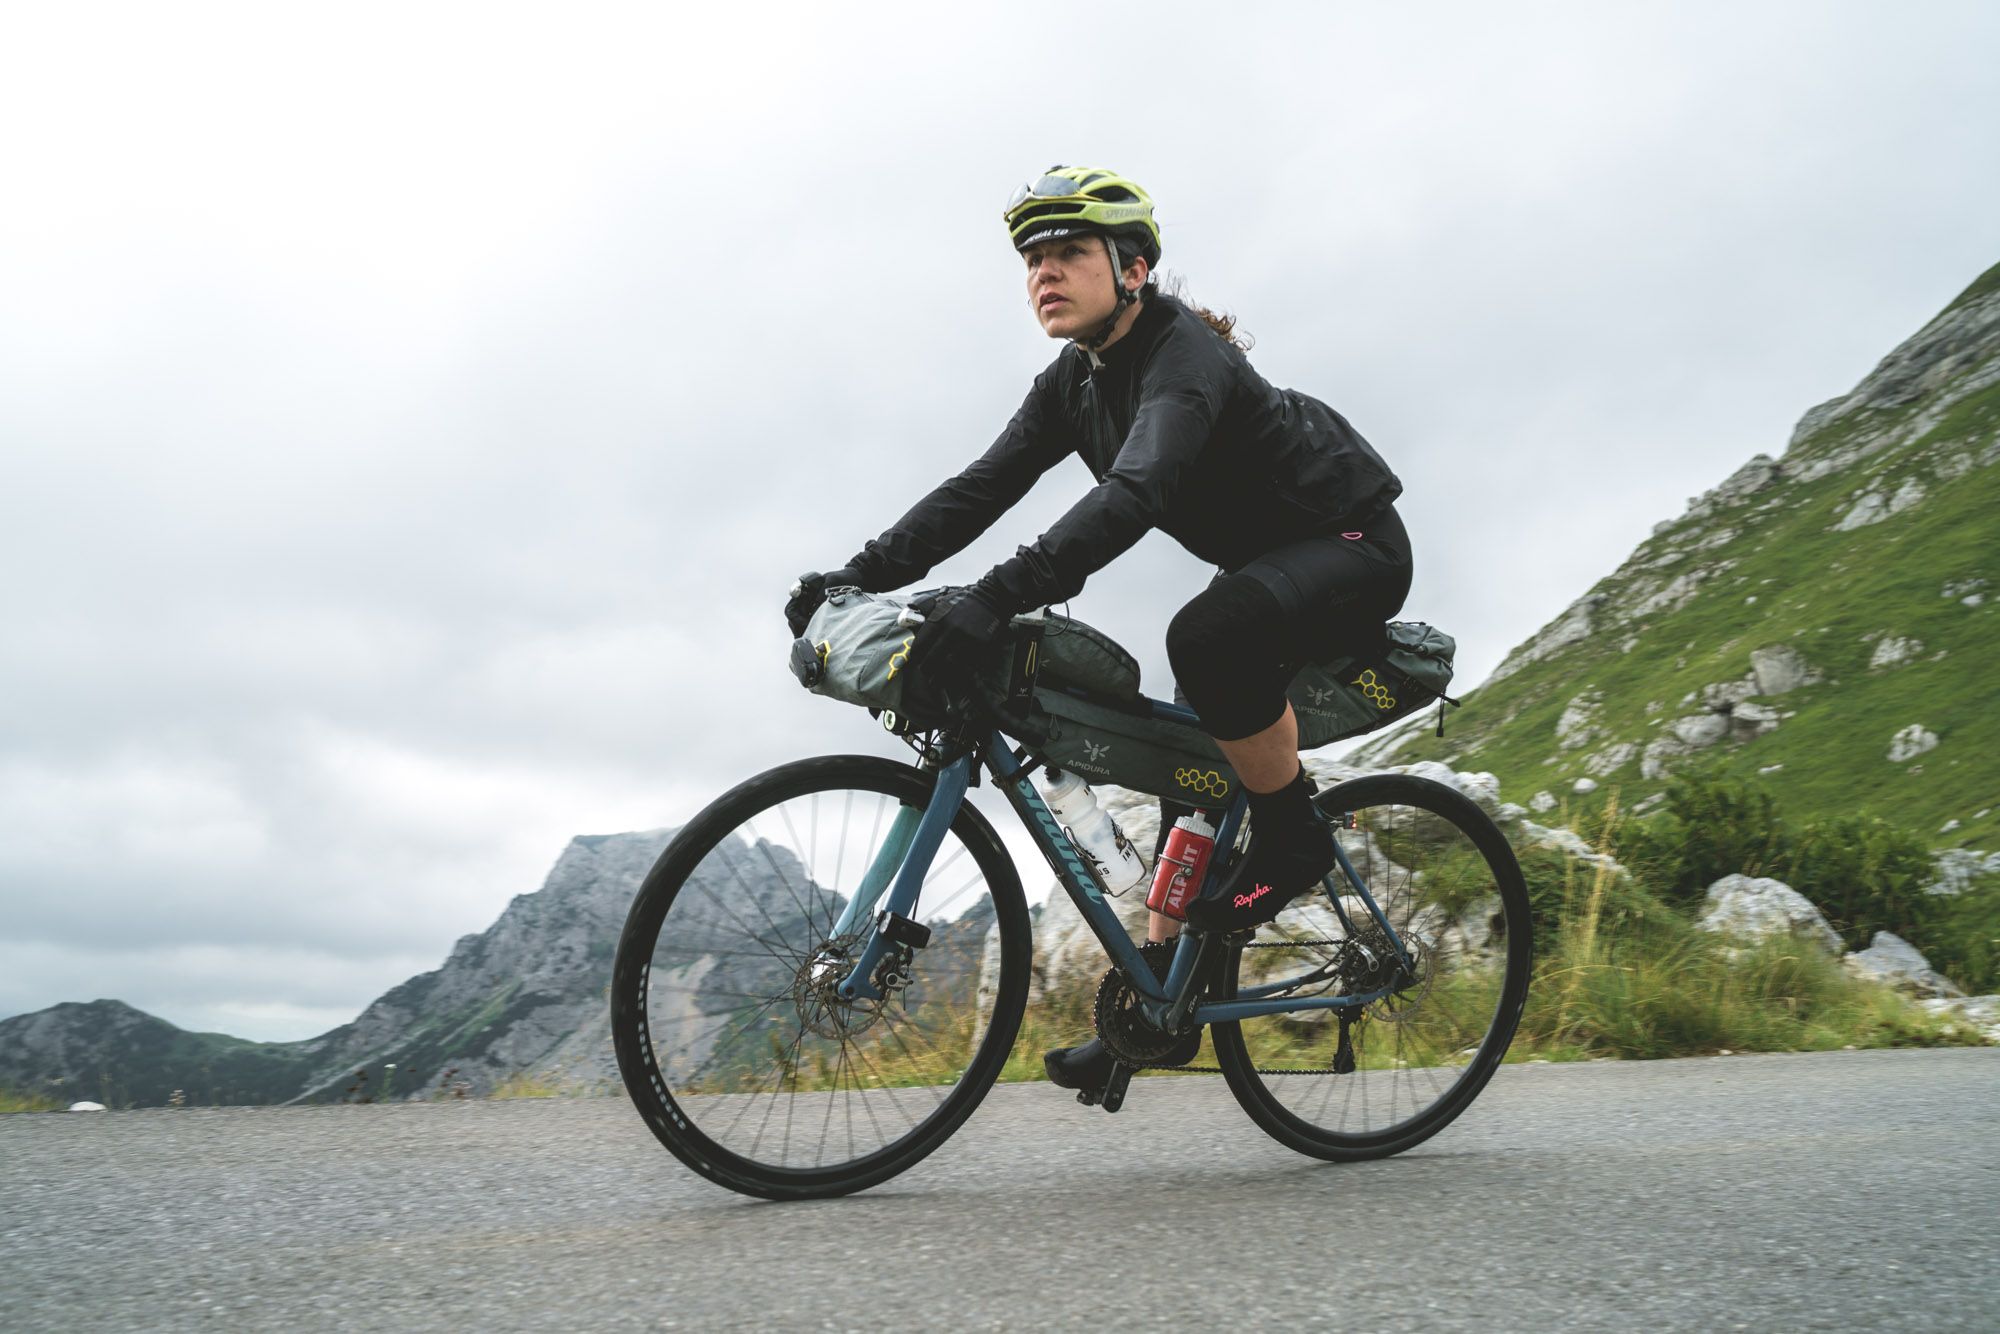 Emily Chappell, cycling on the Transcontinental Race, 2016. Photo: Kristian Pletten